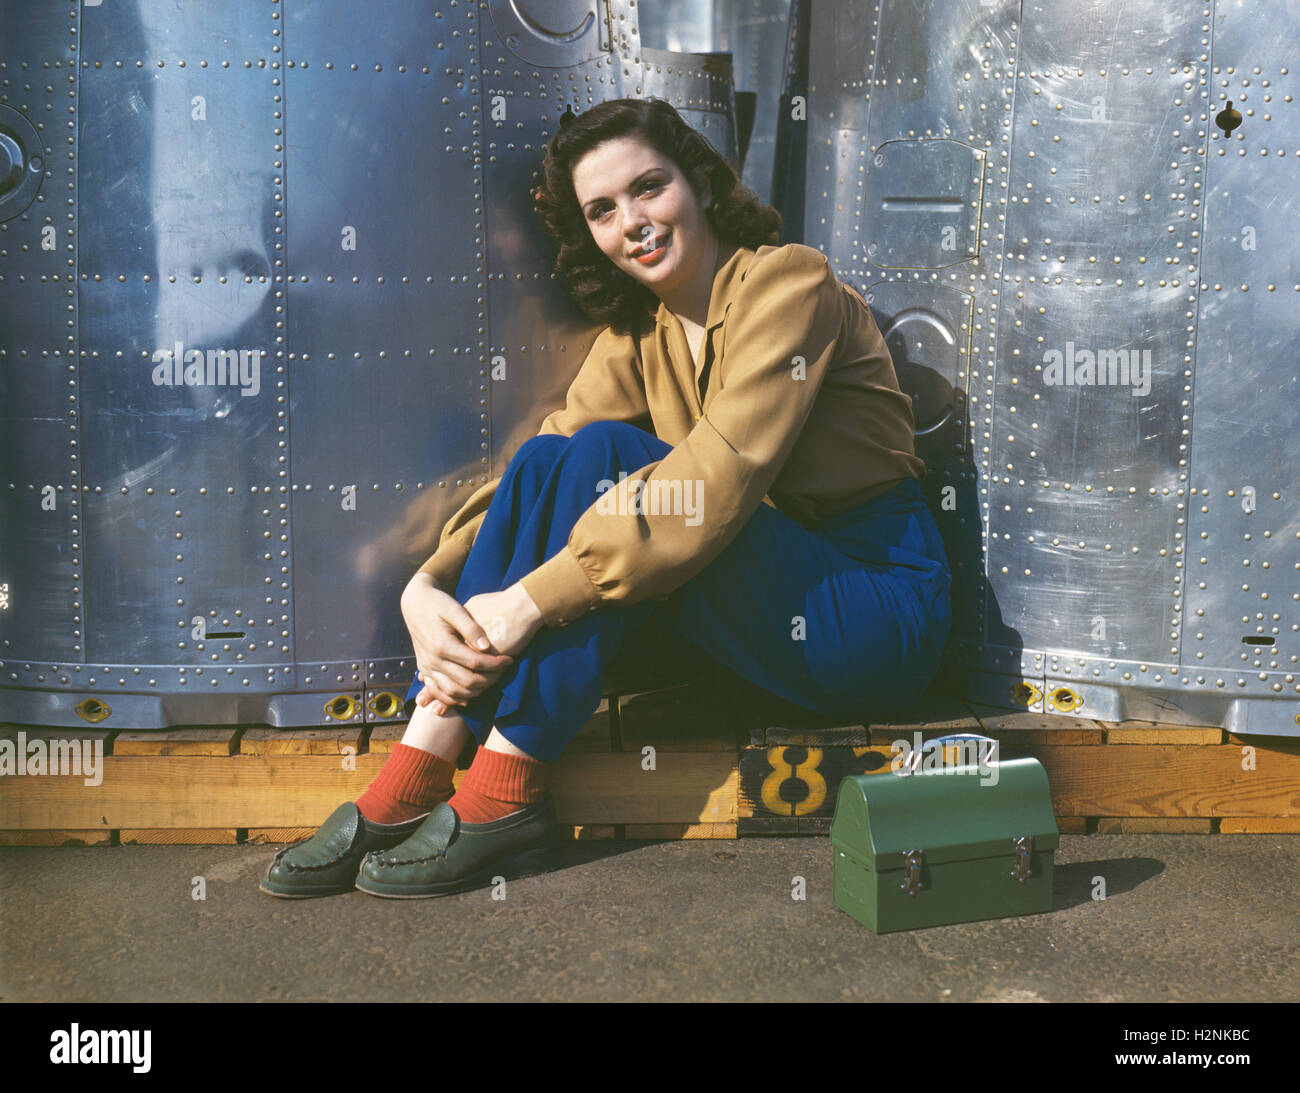 Female Worker on Lunch Break , Douglas Aircraft Company, Long Beach, USA, Alfred T. Palmer, U.S. Office of War Information, October 1942 Stock Photo